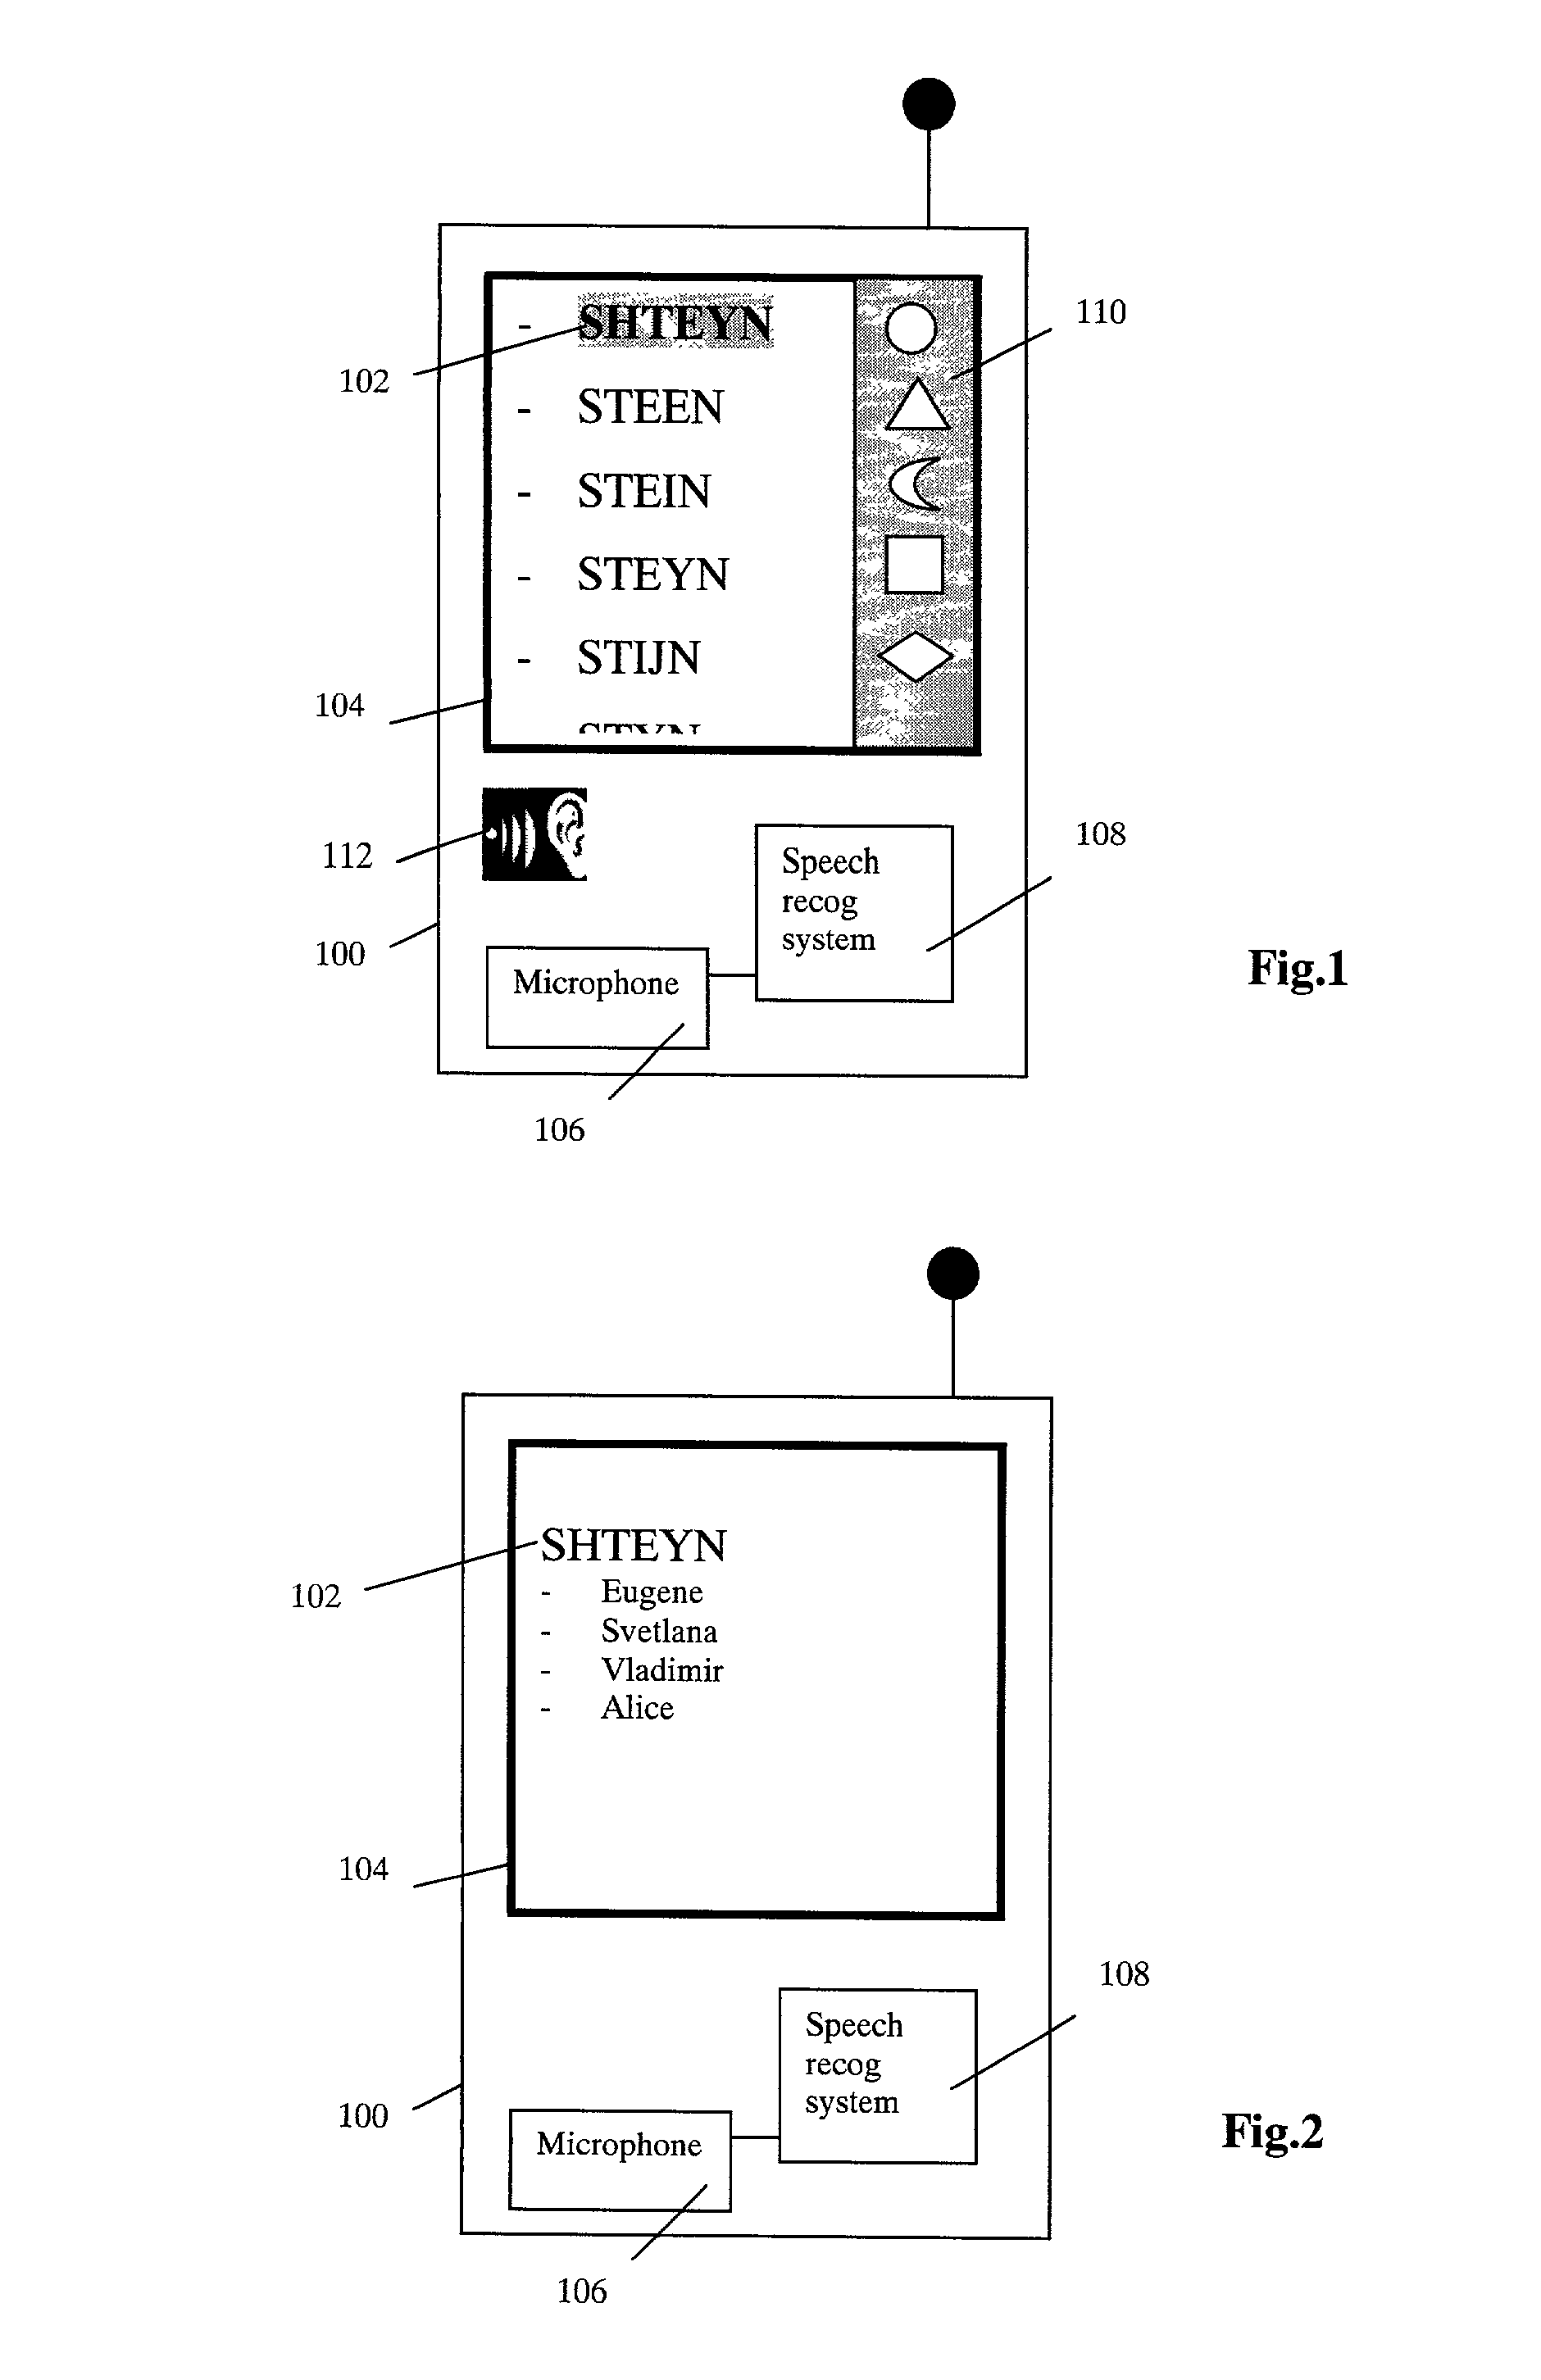 UI with graphics-assisted voice control system